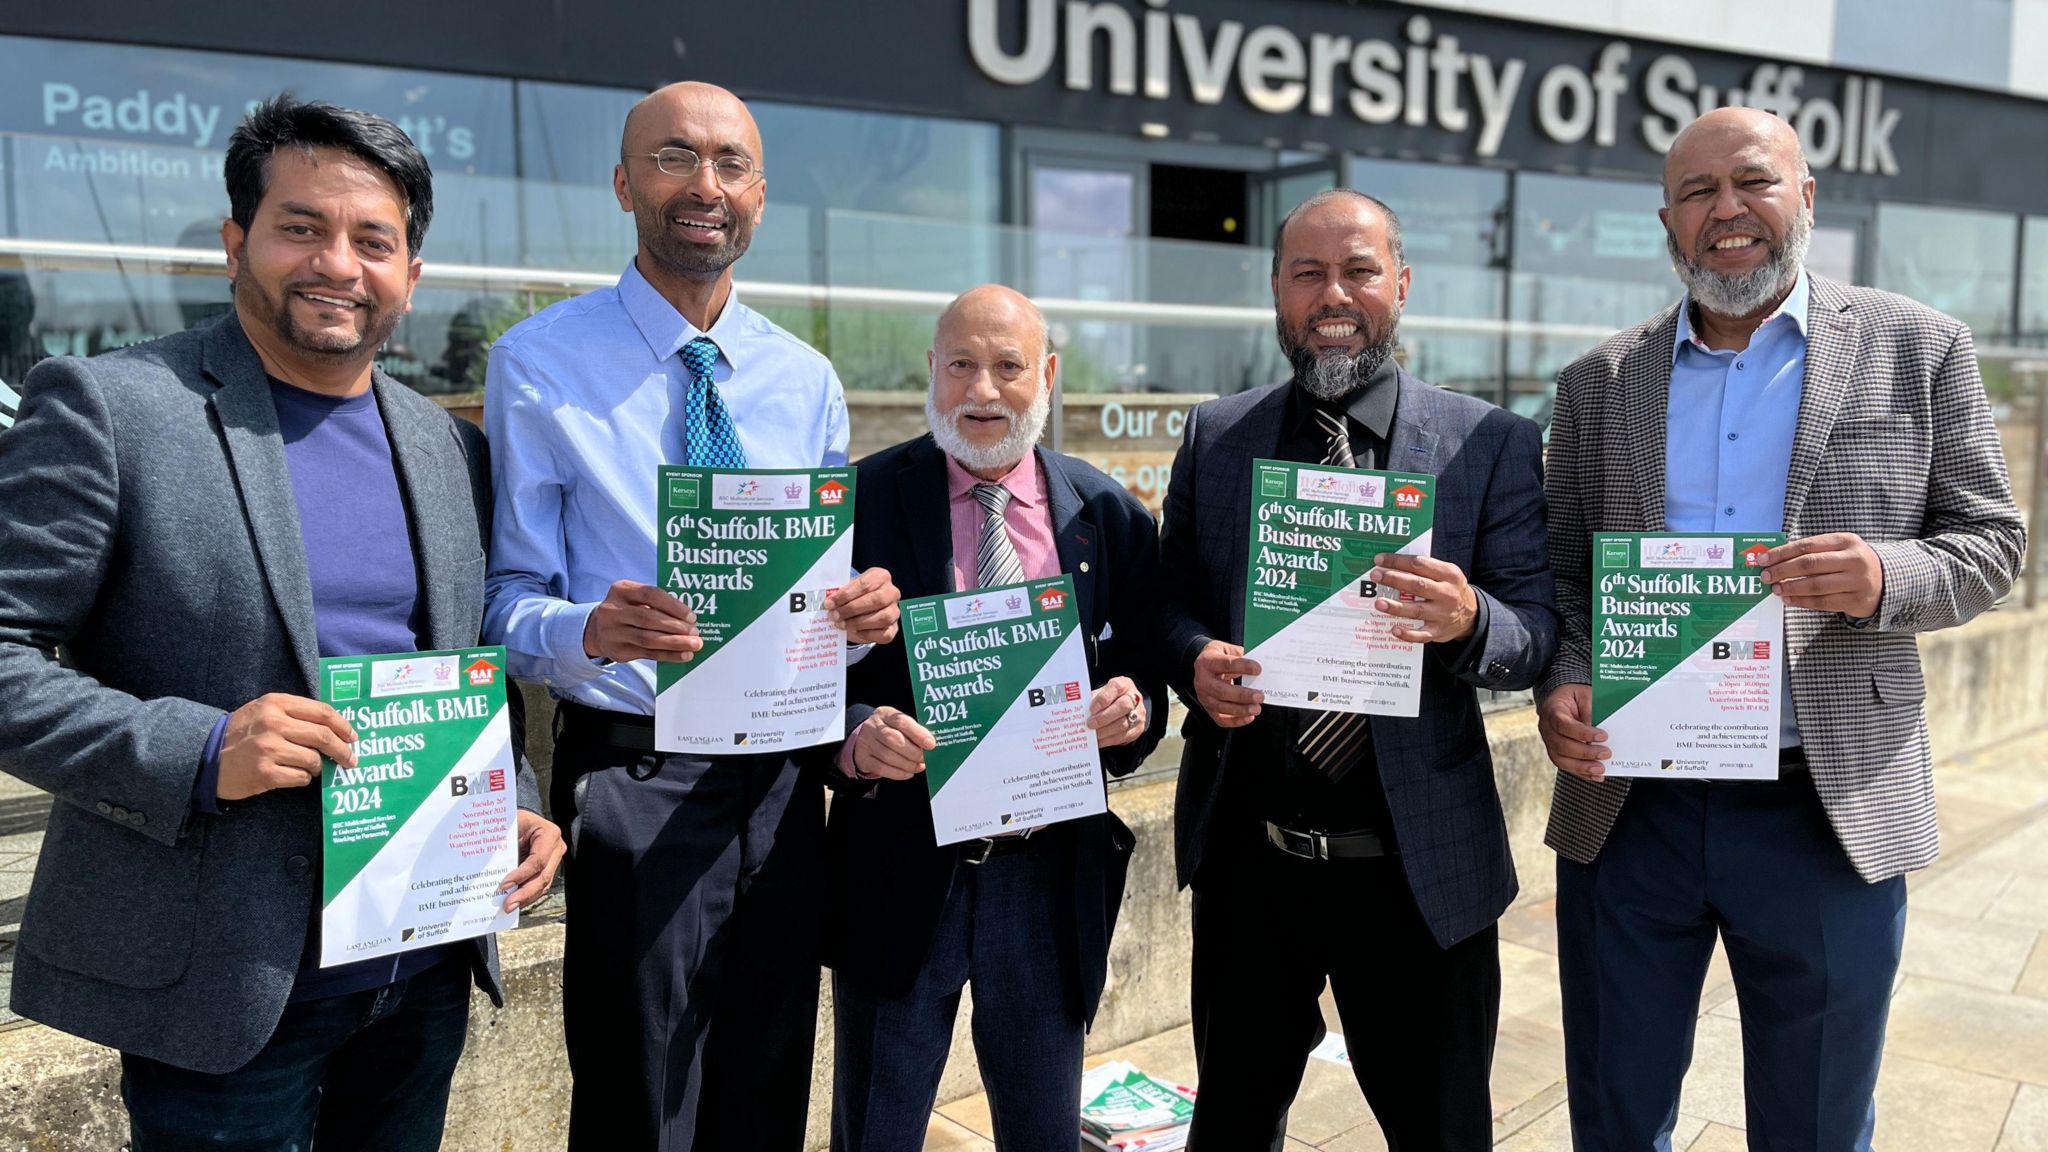 Five men of Bangladeshi heritage stand holding A4 posters promoting an awards event